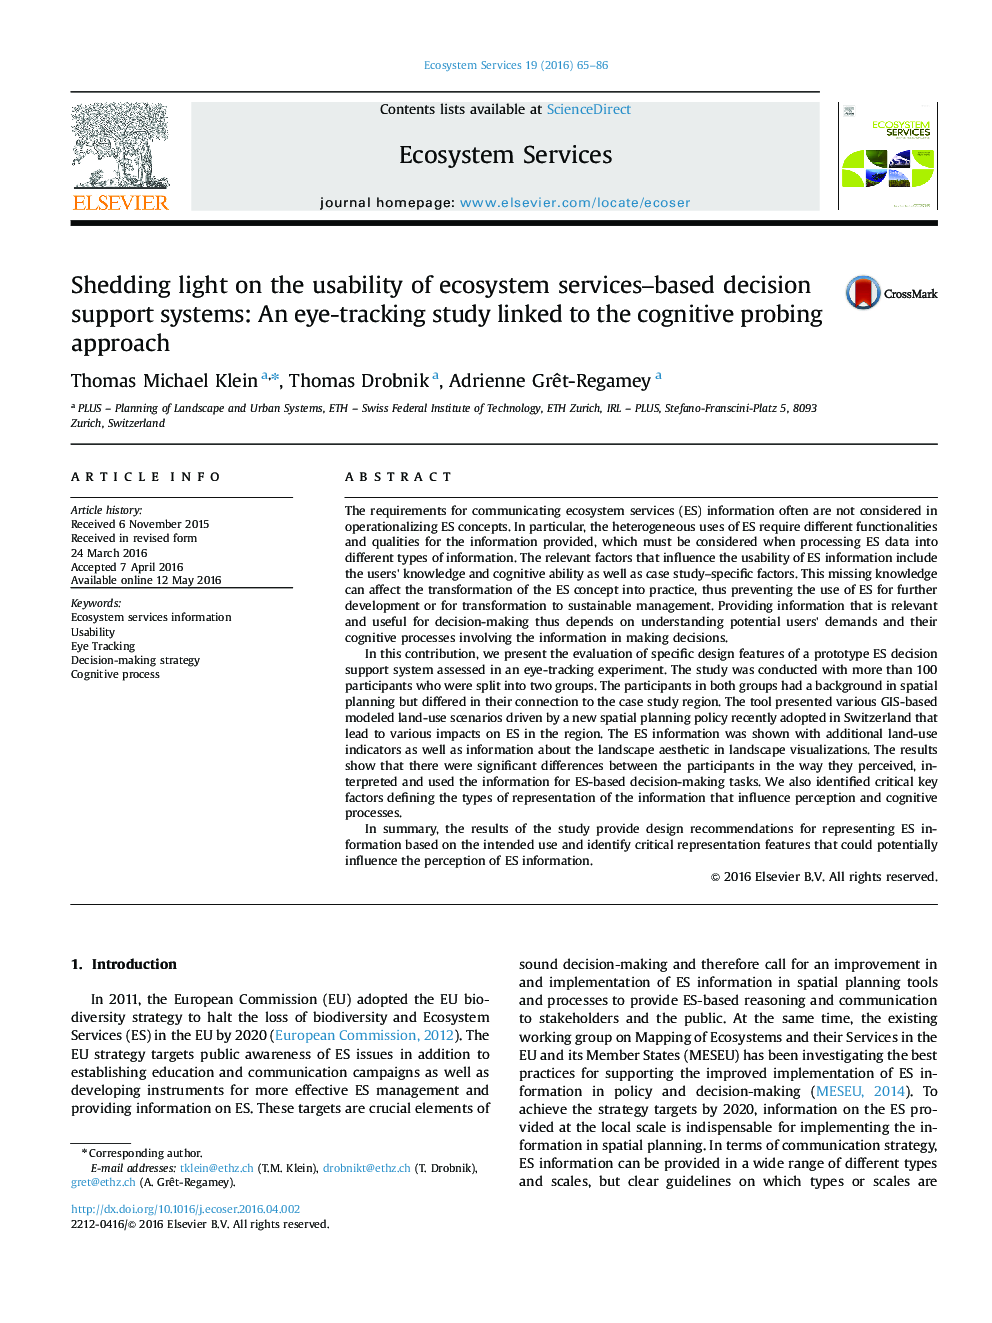 Shedding light on the usability of ecosystem services–based decision support systems: An eye-tracking study linked to the cognitive probing approach